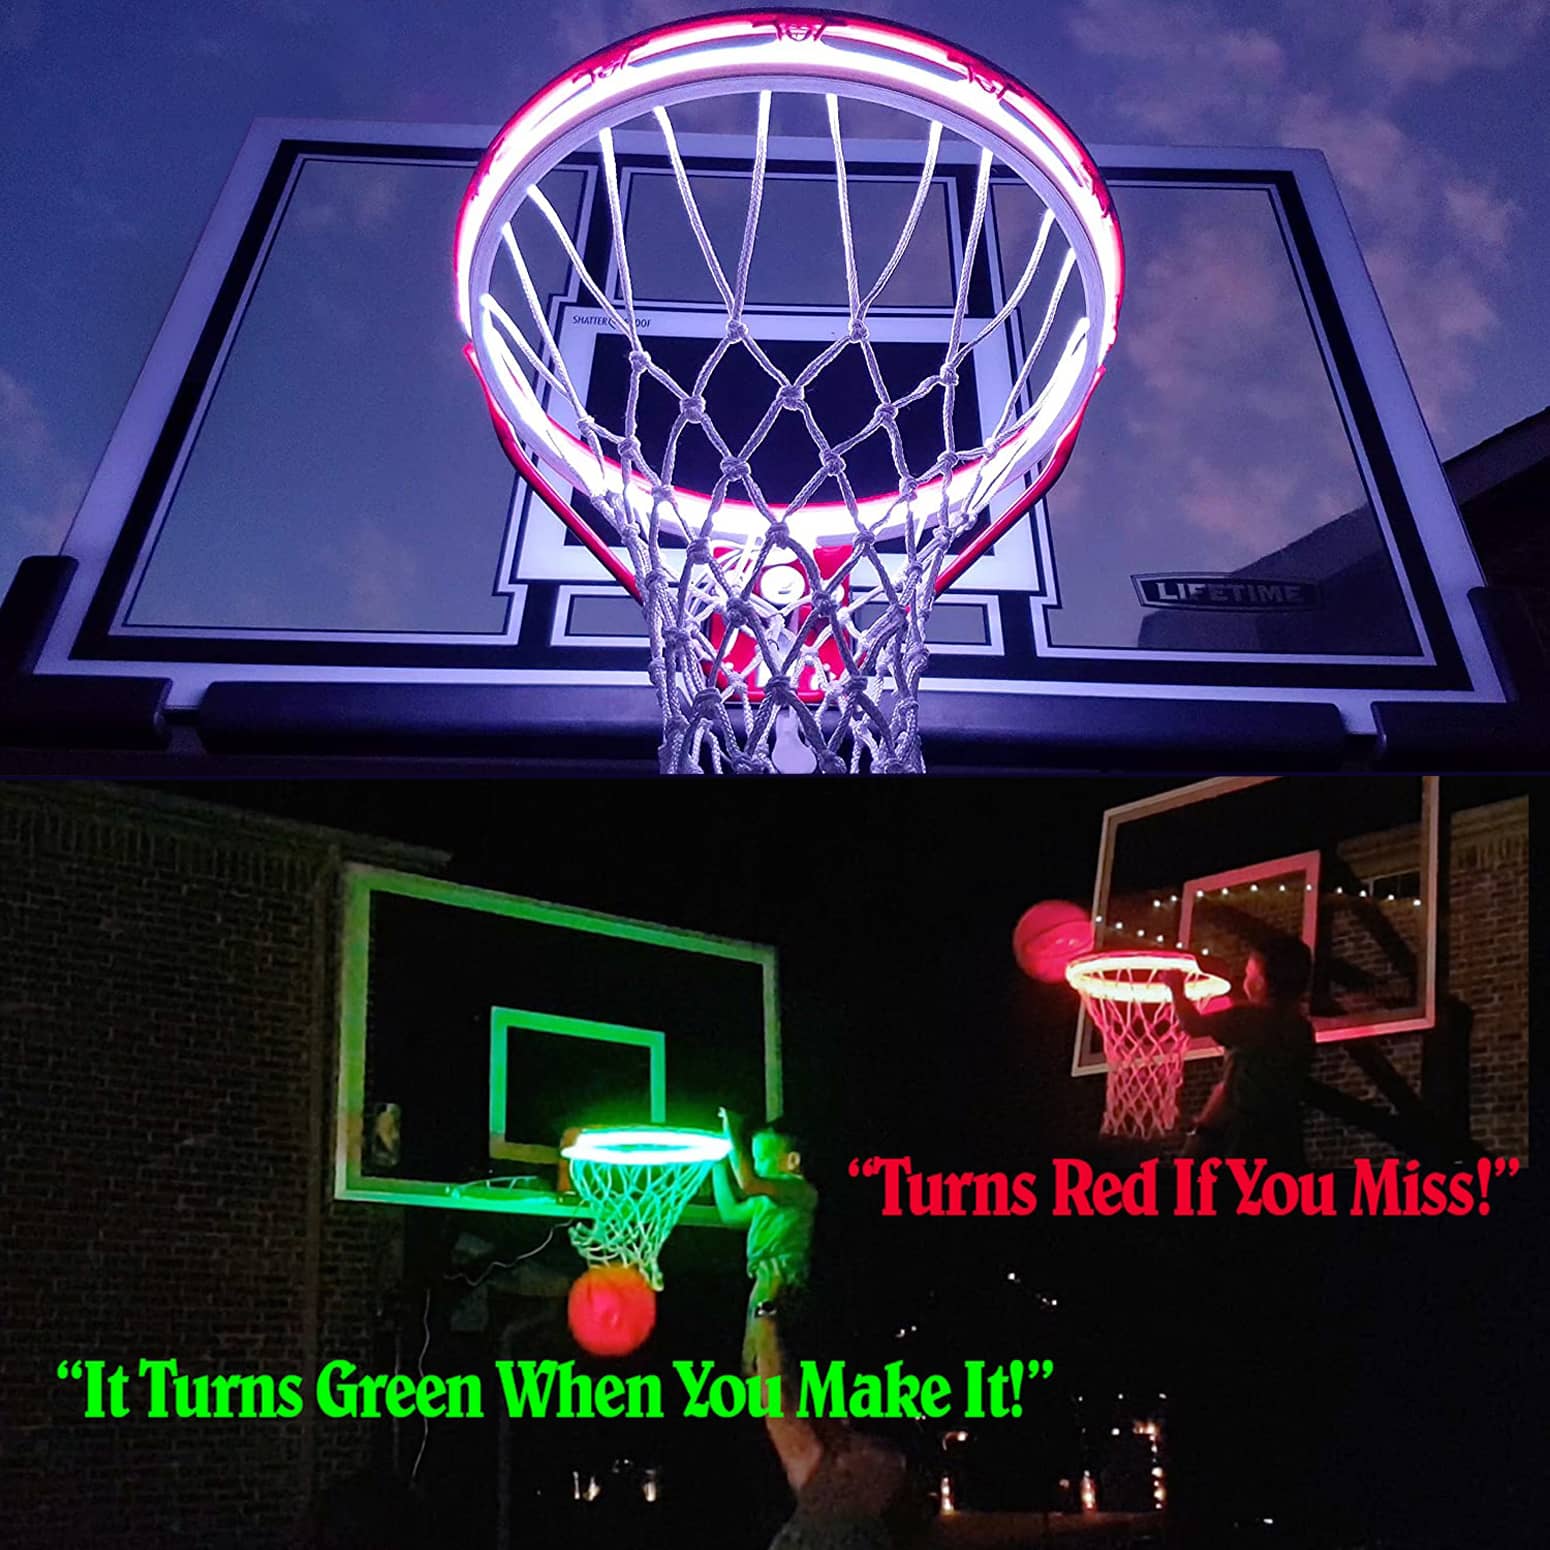 TODRESSUP Lighting The Basketball Hoop Light Led Basketball Net Help You are Shooting at Night Lights Basketball Hoop Lighting kit at Night Lamp